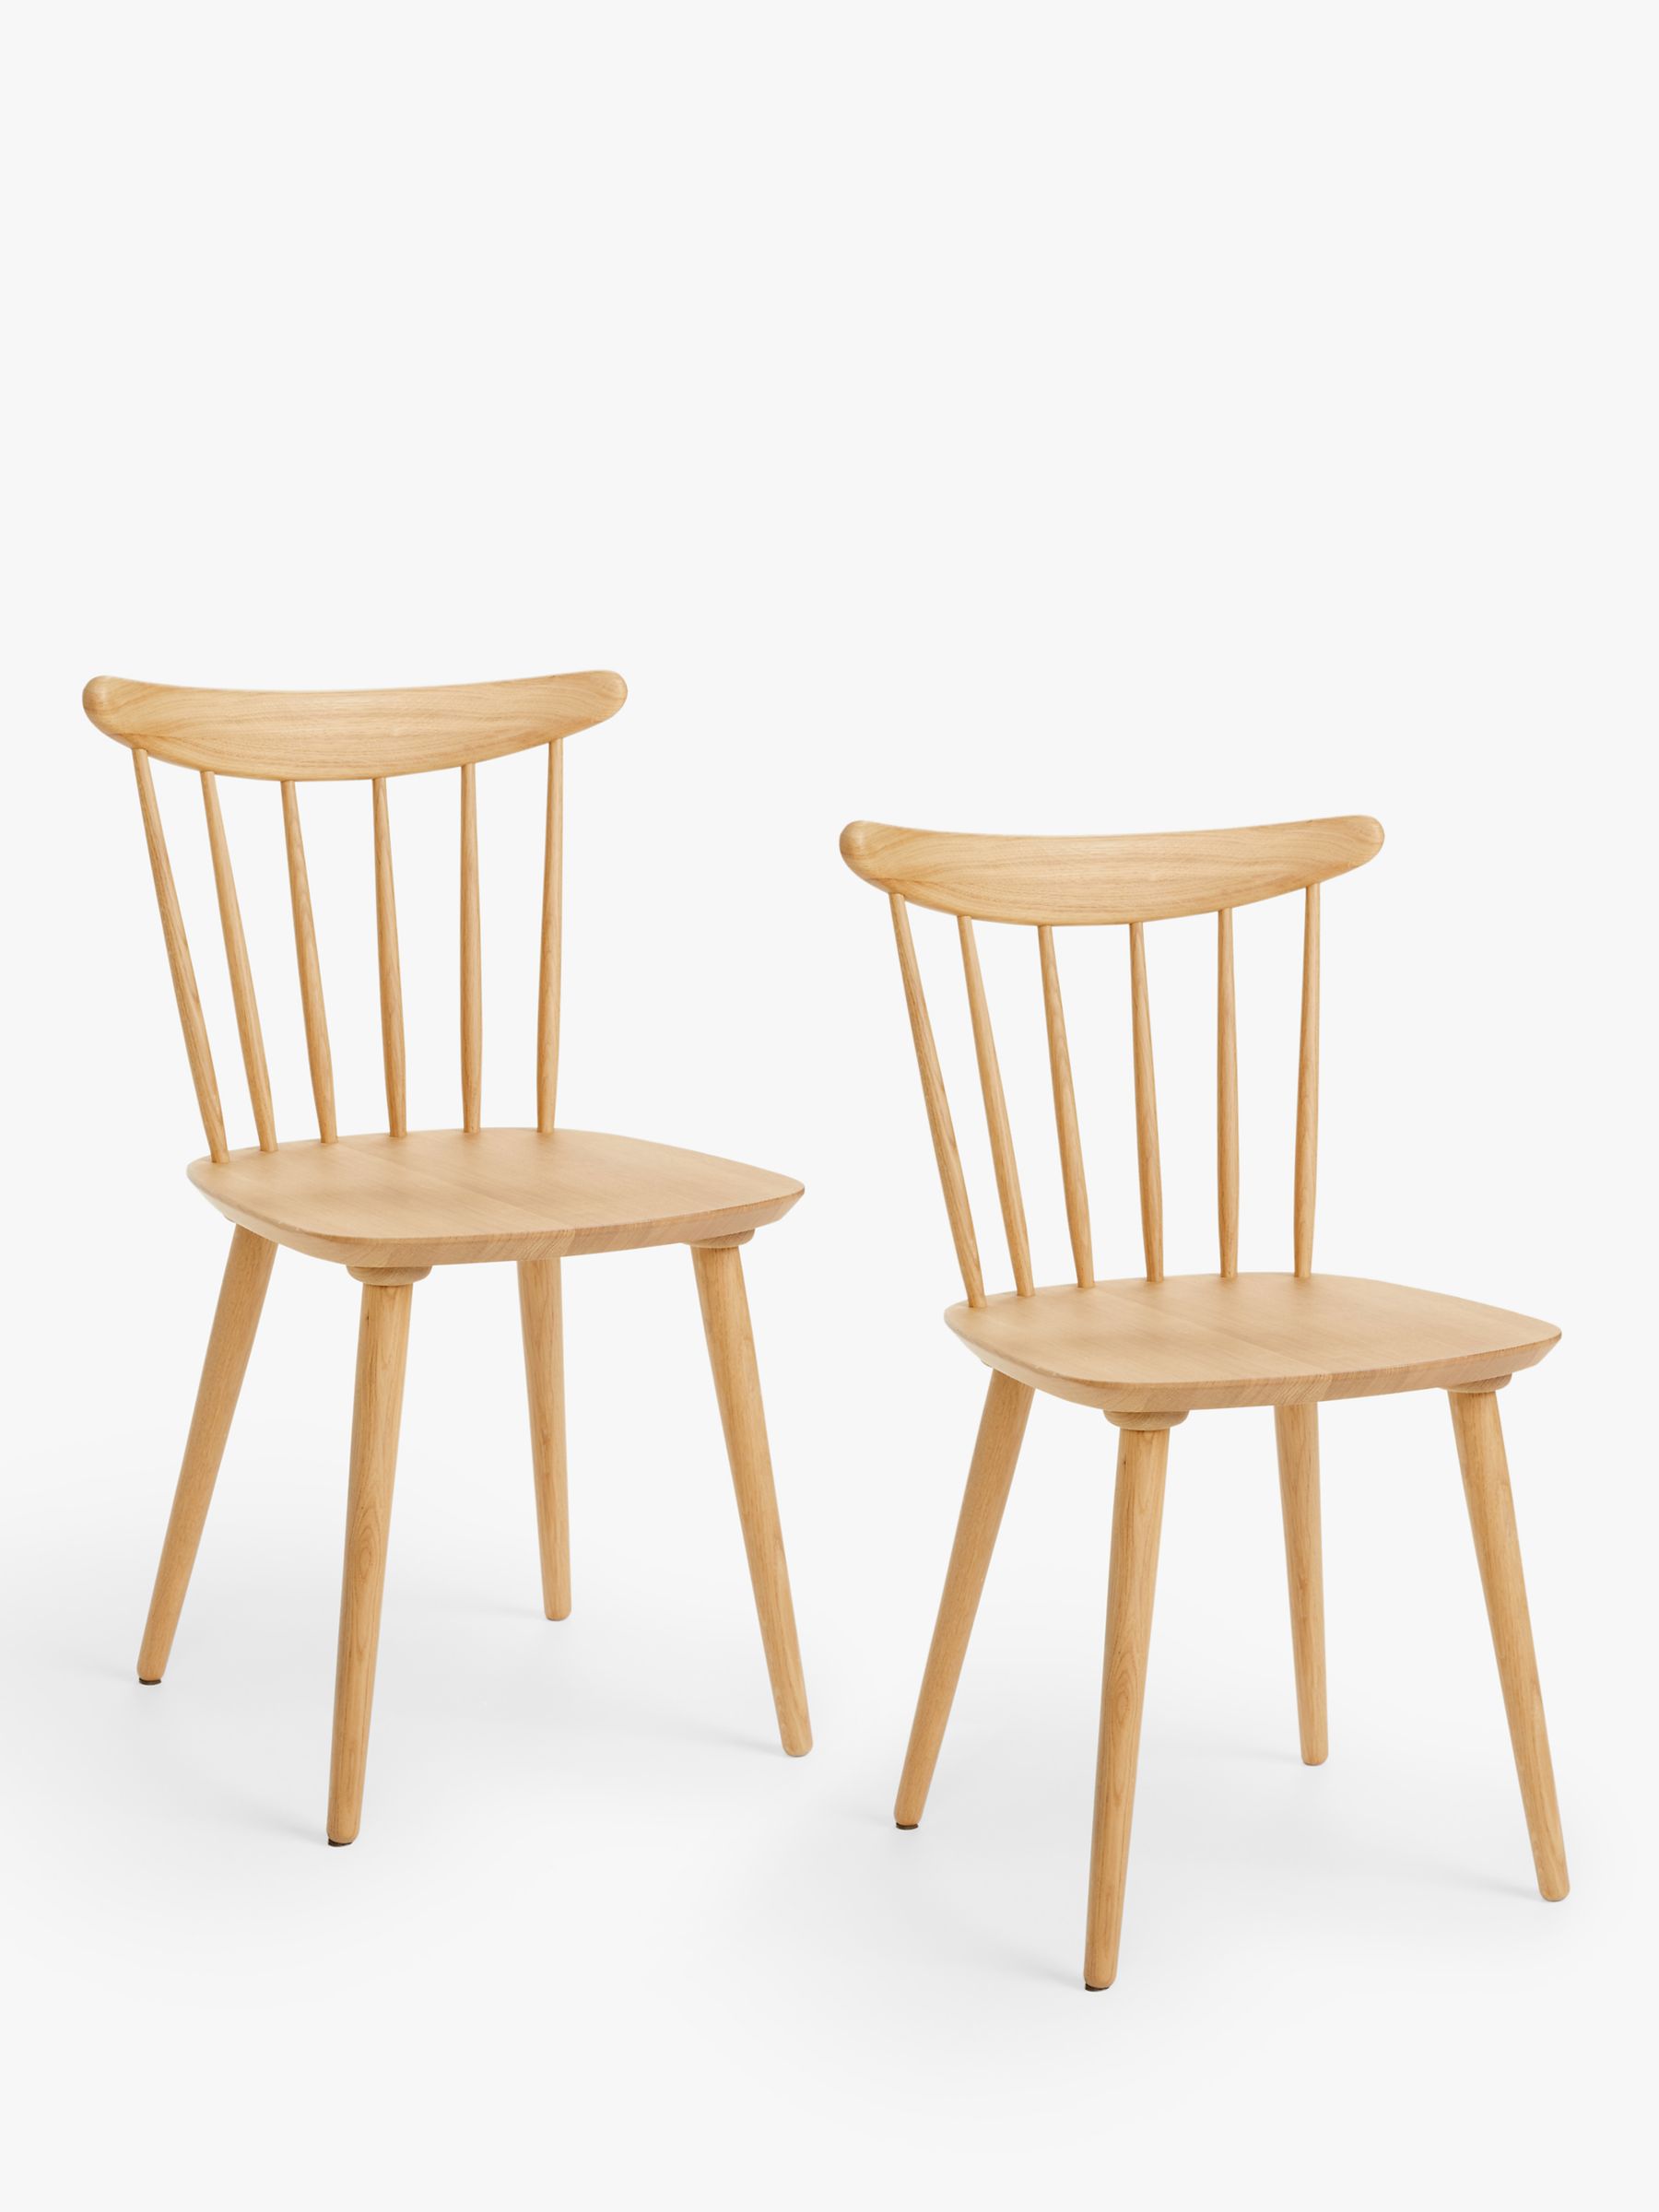 Photo of John lewis anyday spindle dining chair set of 2 fsc-certified -beech wood-